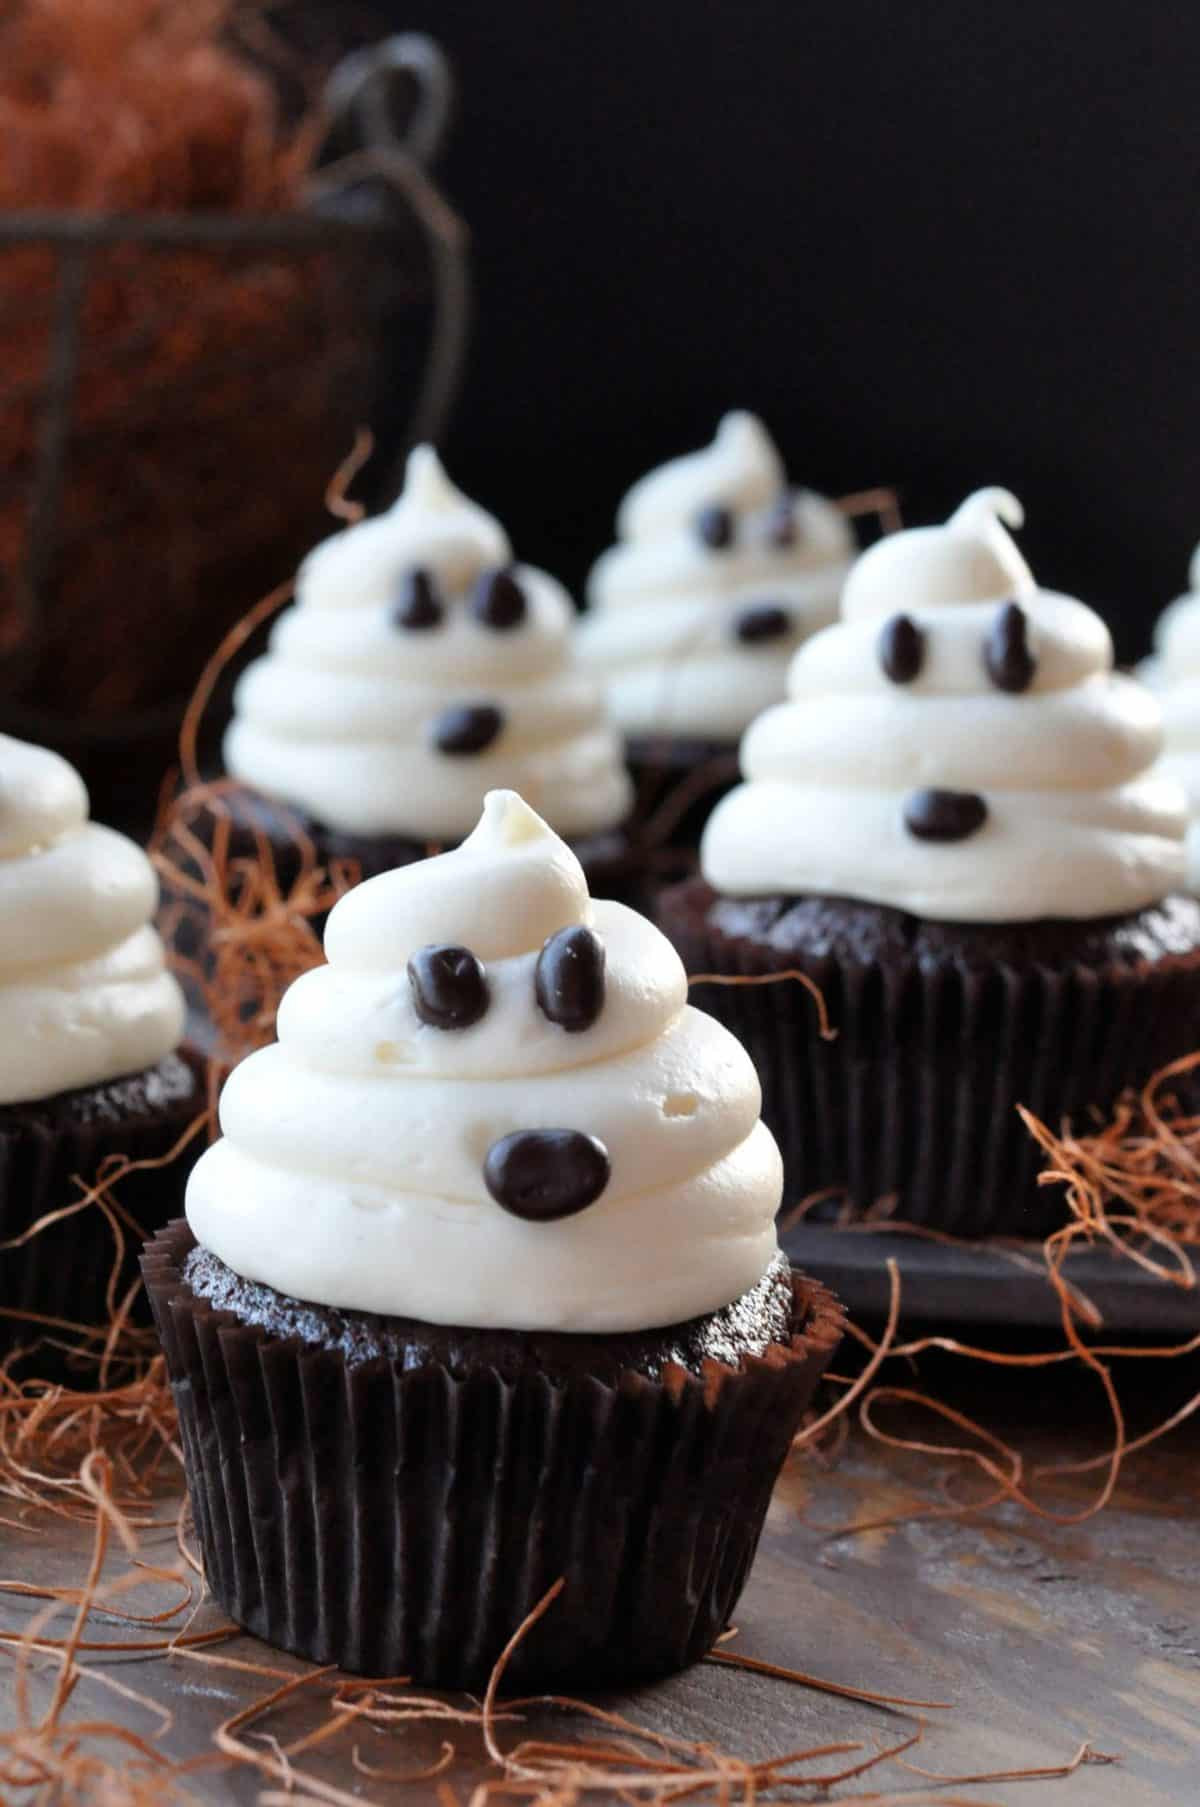 Halloween Cupcake Cakes
 Halloween Ghosts on Carrot Cake Recipe—Fast and Easy